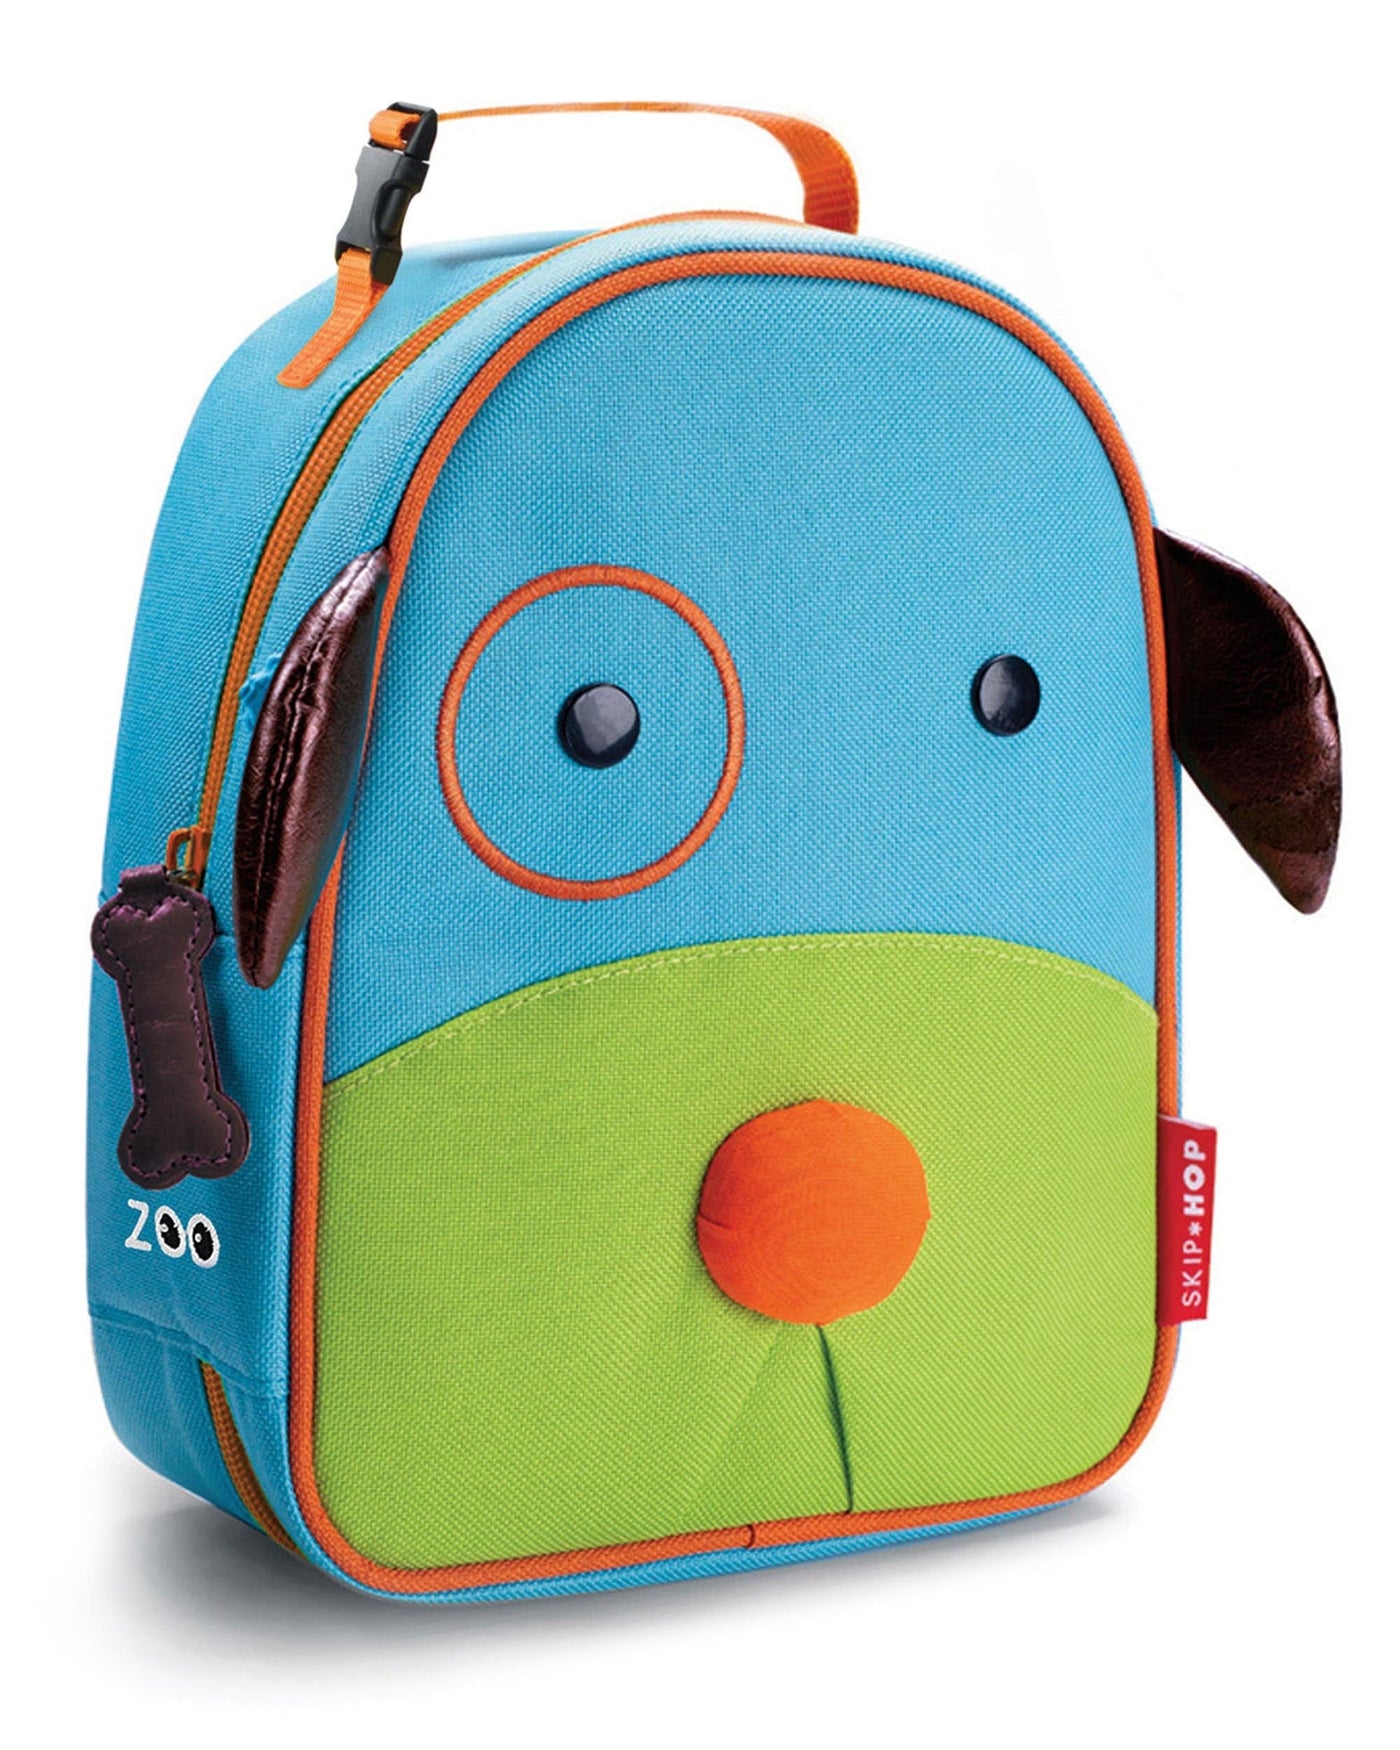 Zoo Lunchie Insulated Kids Lunch Bag | Skip Hop by Skip Hop, USA Baby Care